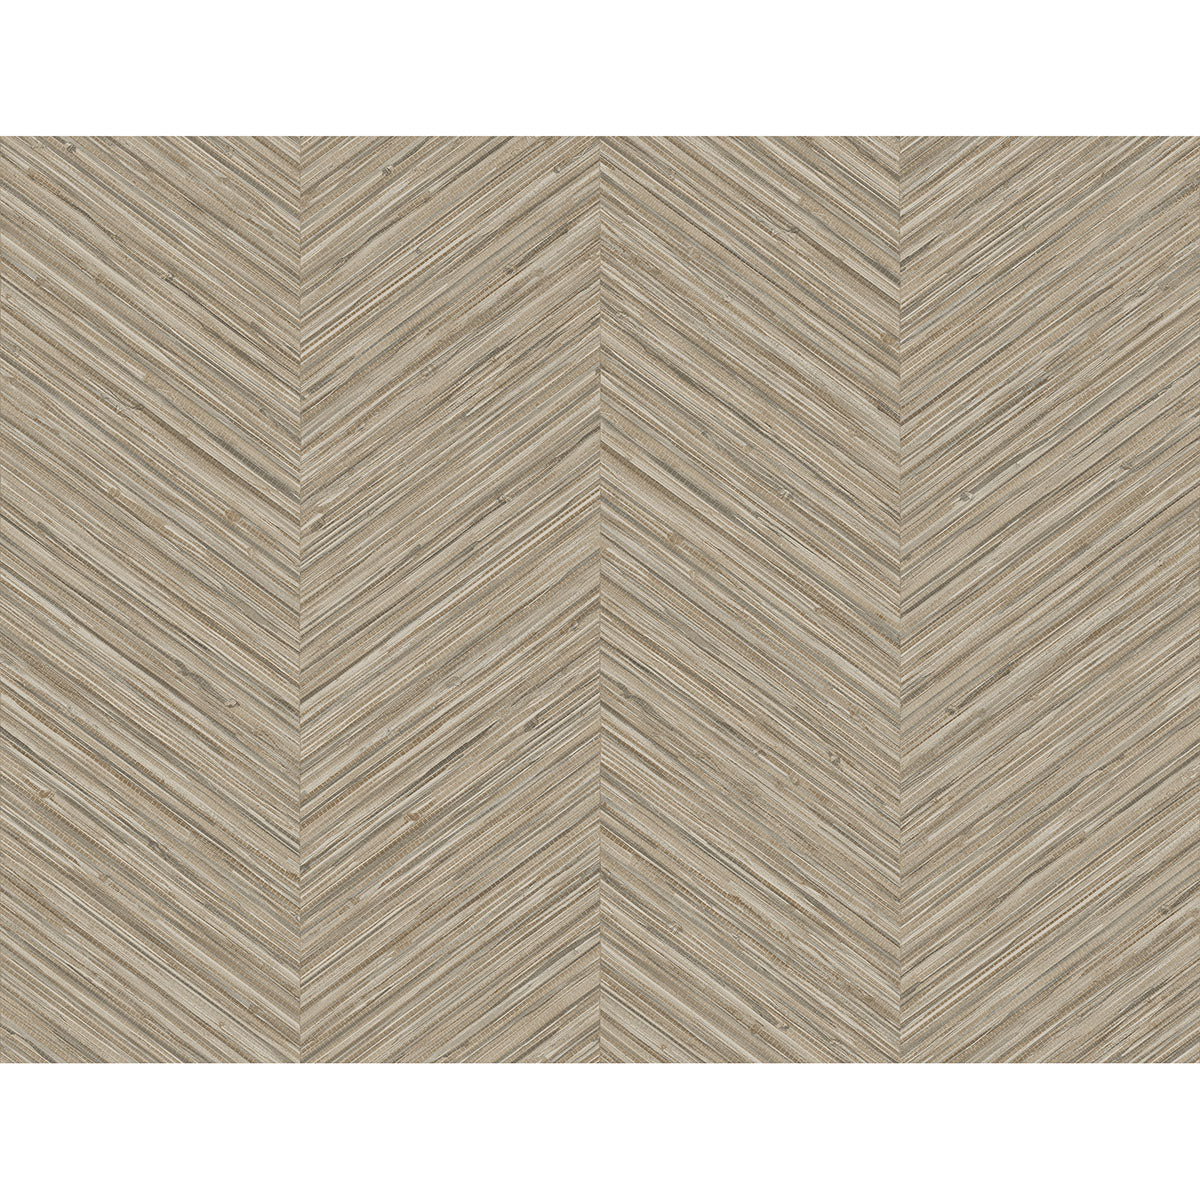 Picture of Apex Light Brown Weave Wallpaper